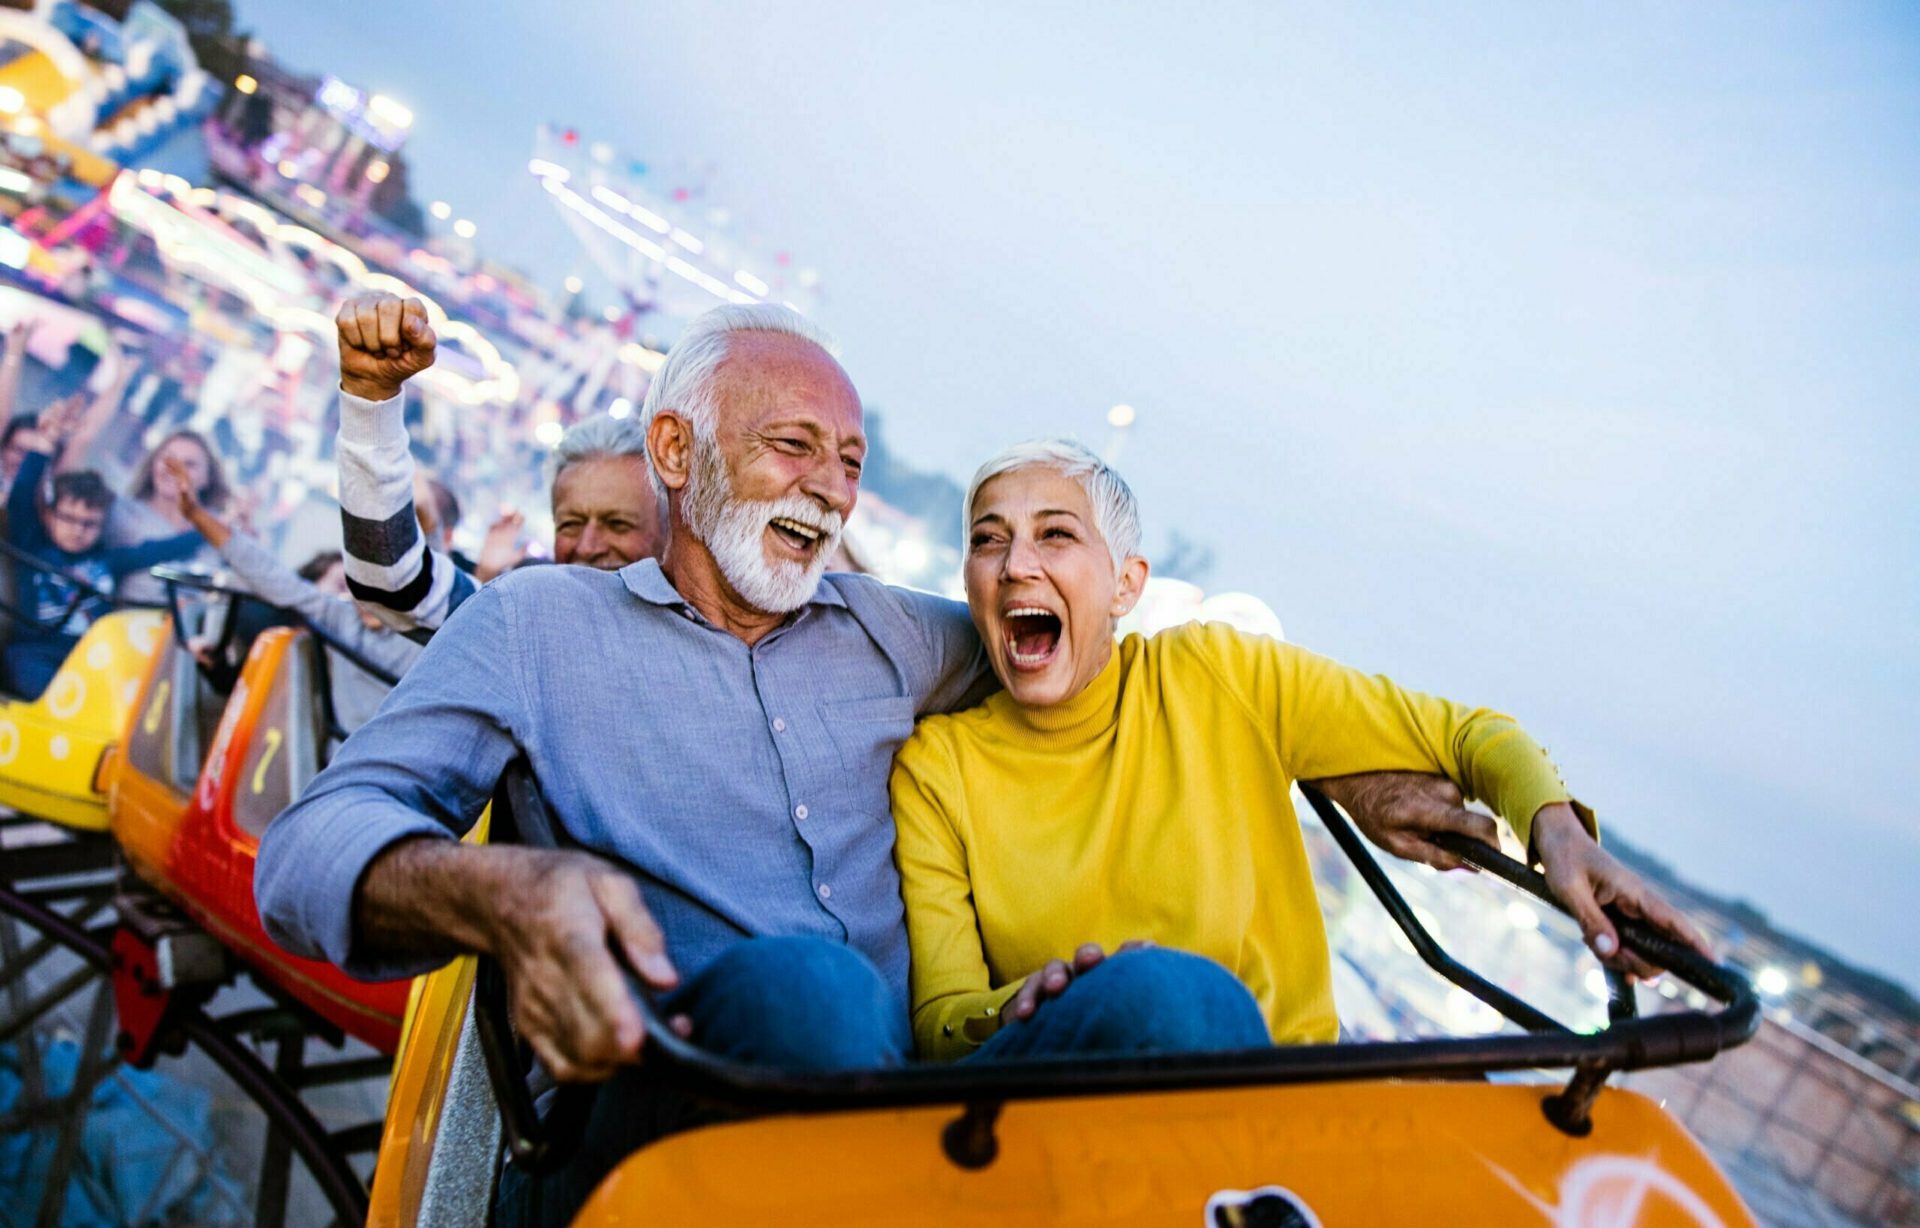 Cheerful senior couple having fun while riding on rollercoaster at amusement park